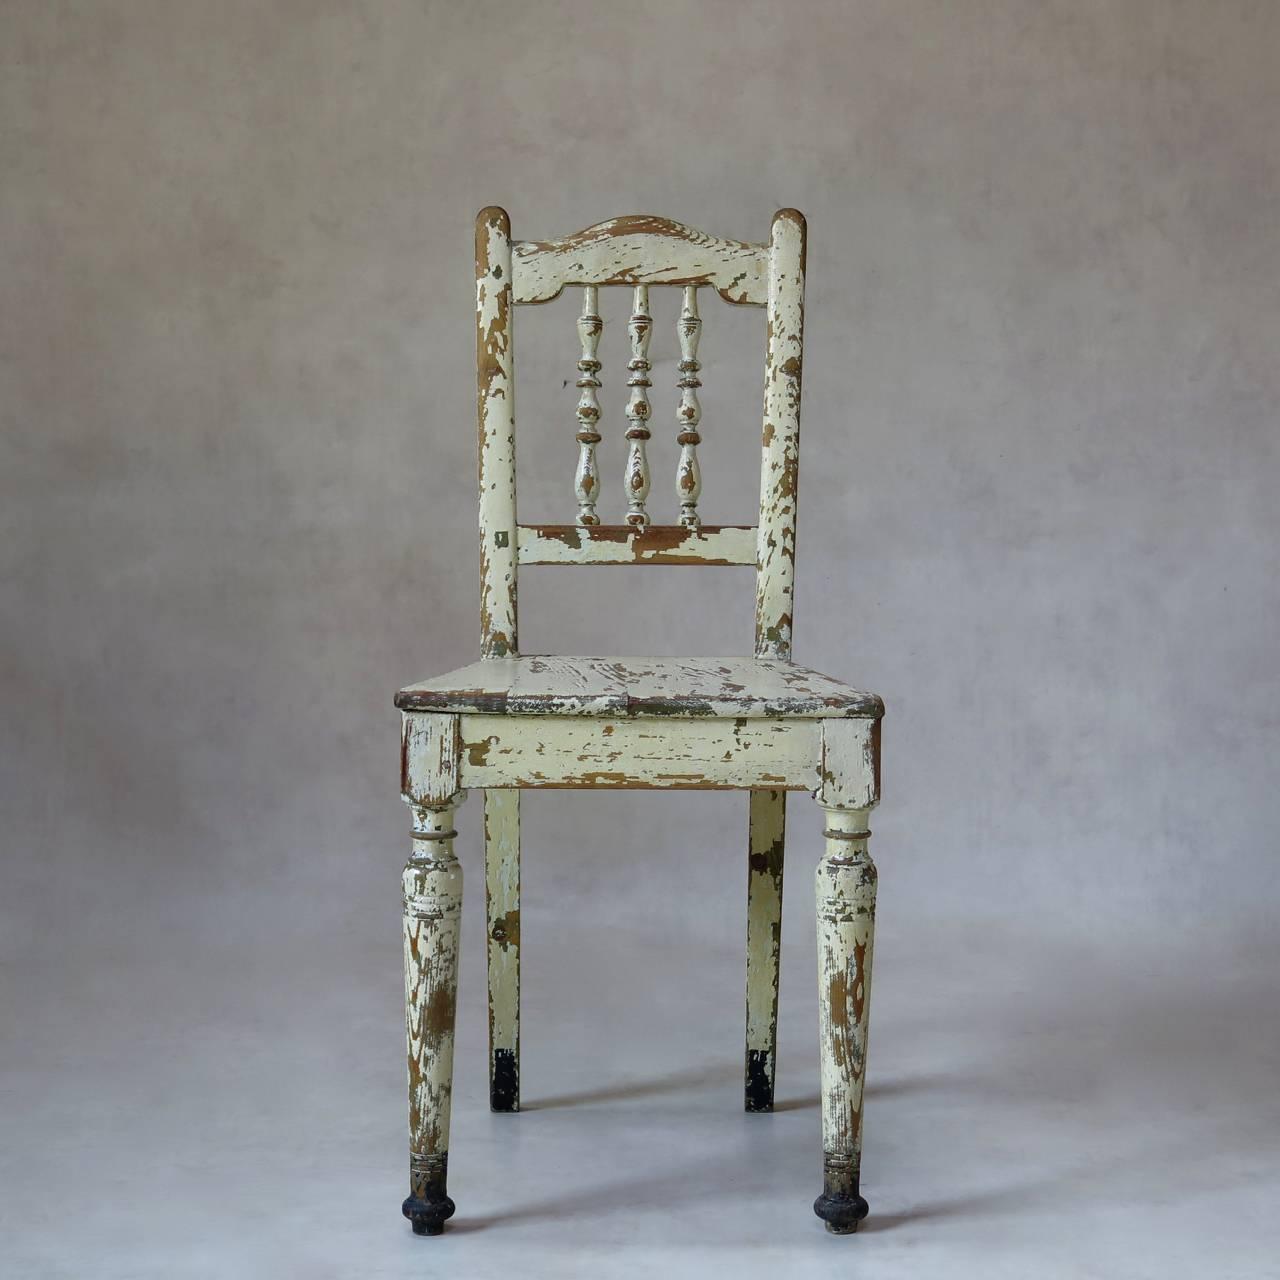 Set of three sturdy wooden chairs with petite backs and large trapezoidal seats. Original and heavily distressed cream-colored paint. The feet have been rather charmingly dipped in black.